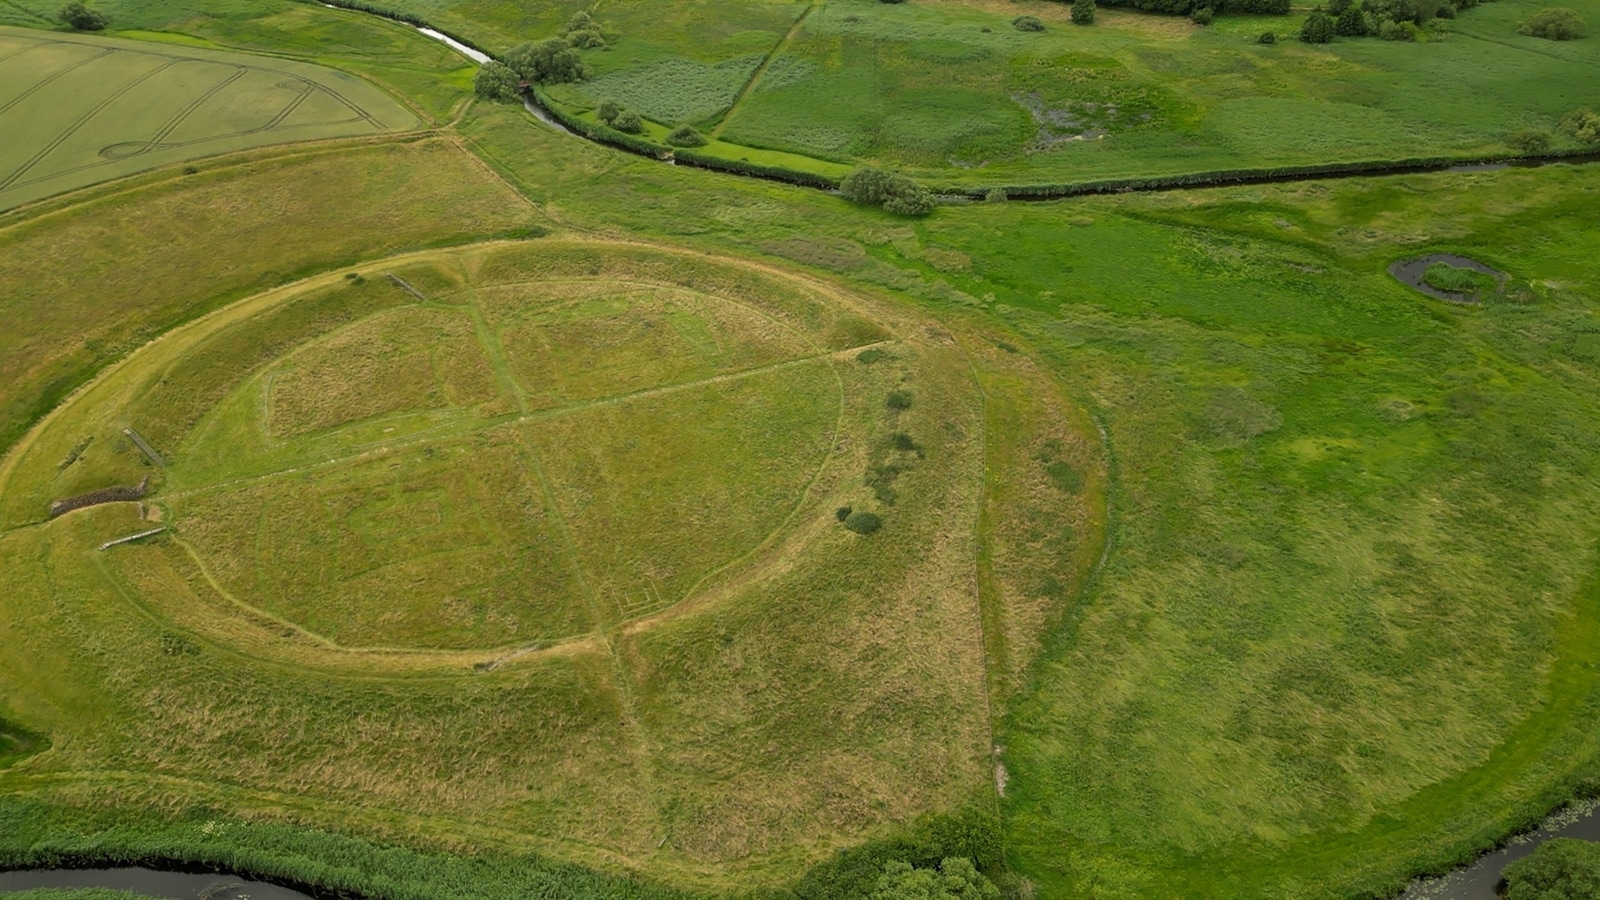 Danish Viking fortress amazes tourists with UNESCO recognition | Travel